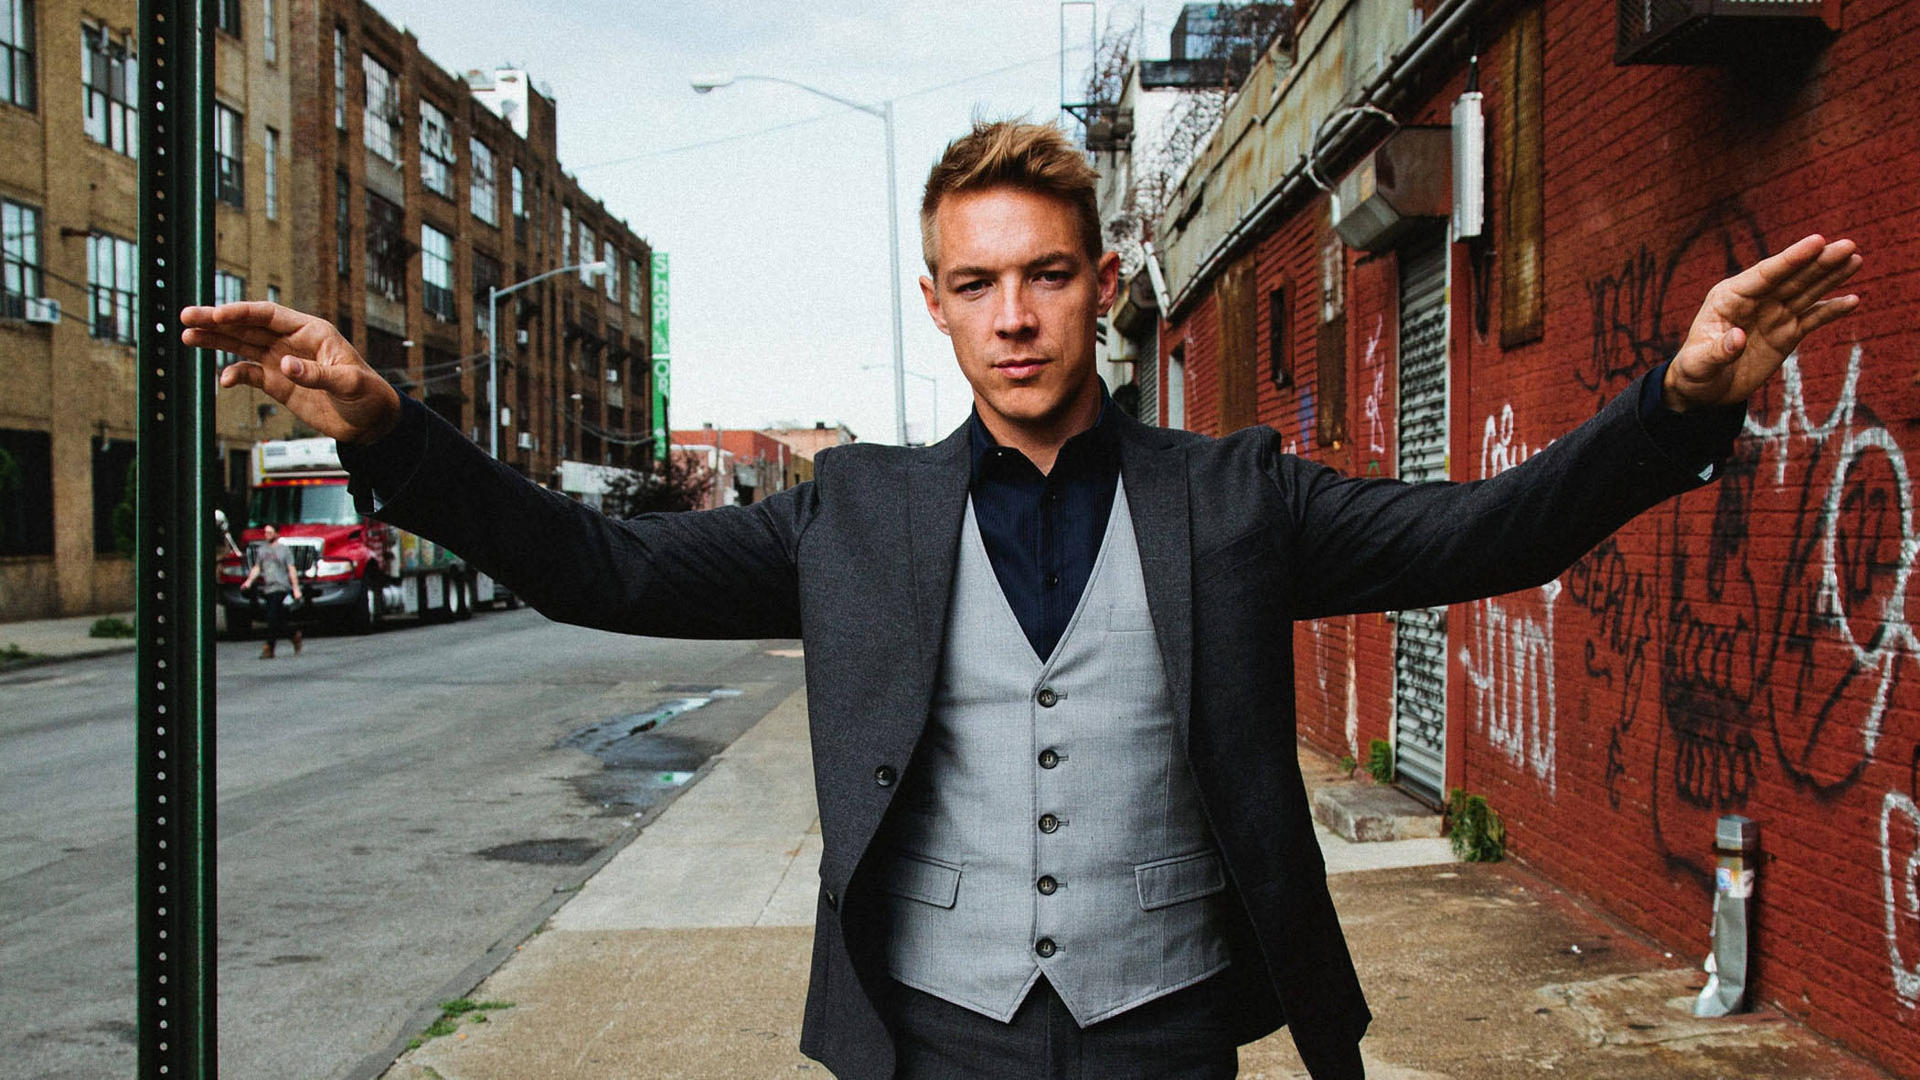 "People respect my opinion now to the point where I have a little leverage. I have to take advantage of that," Diplo says.